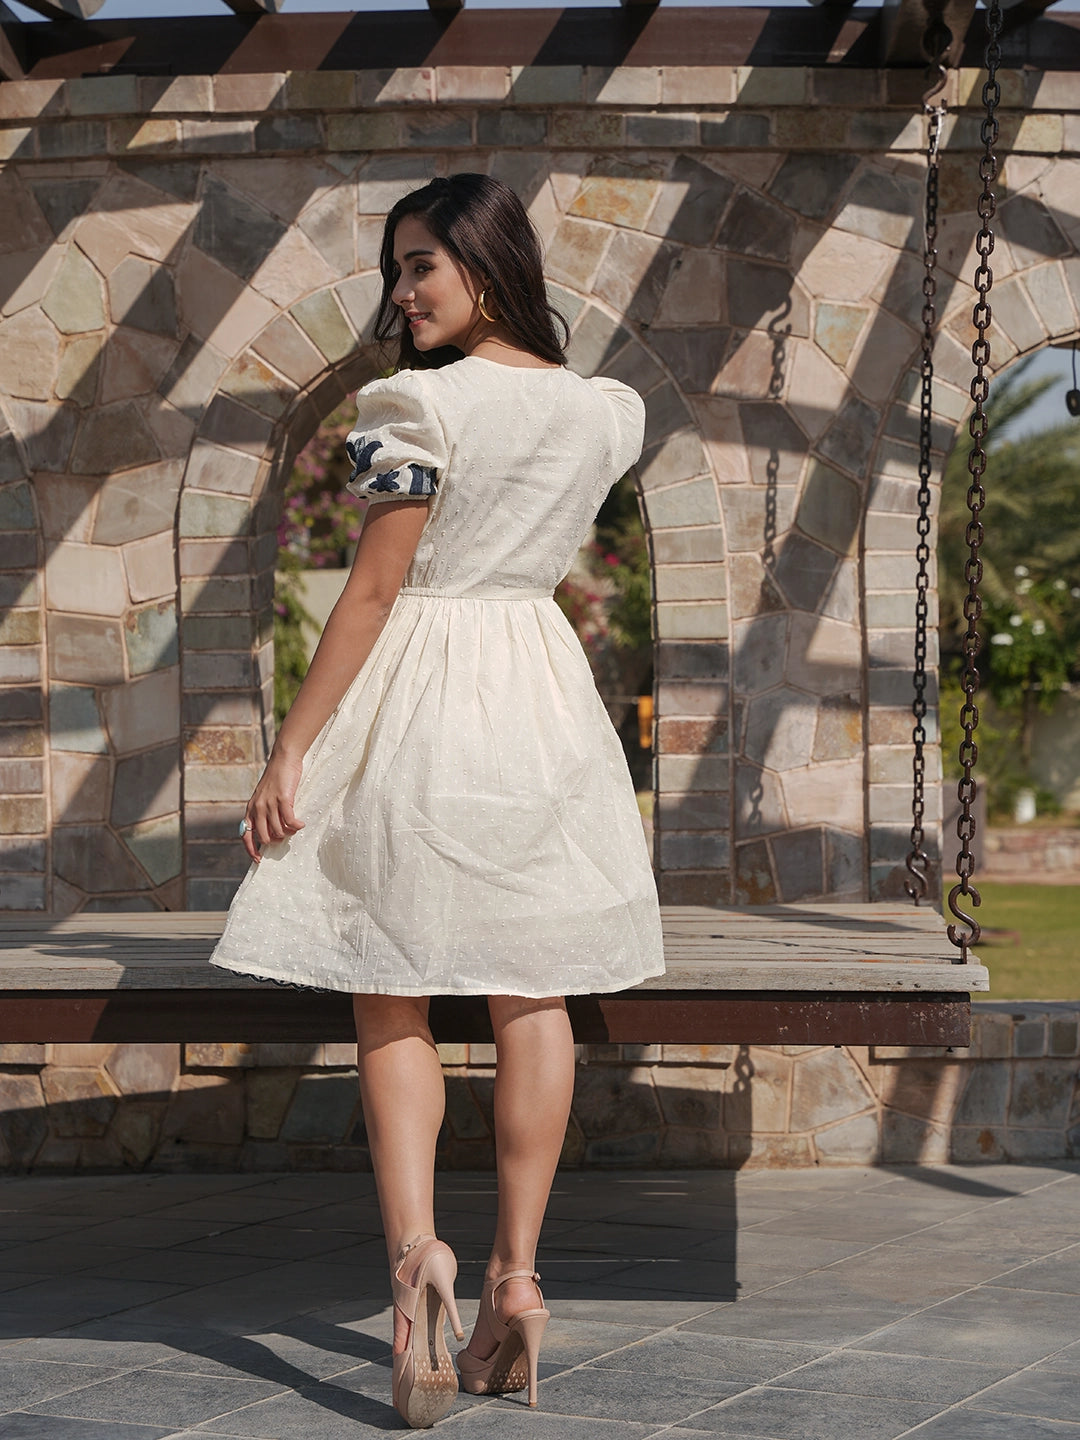 Monochrome Bloom: White Short Dress with Black Embroidery